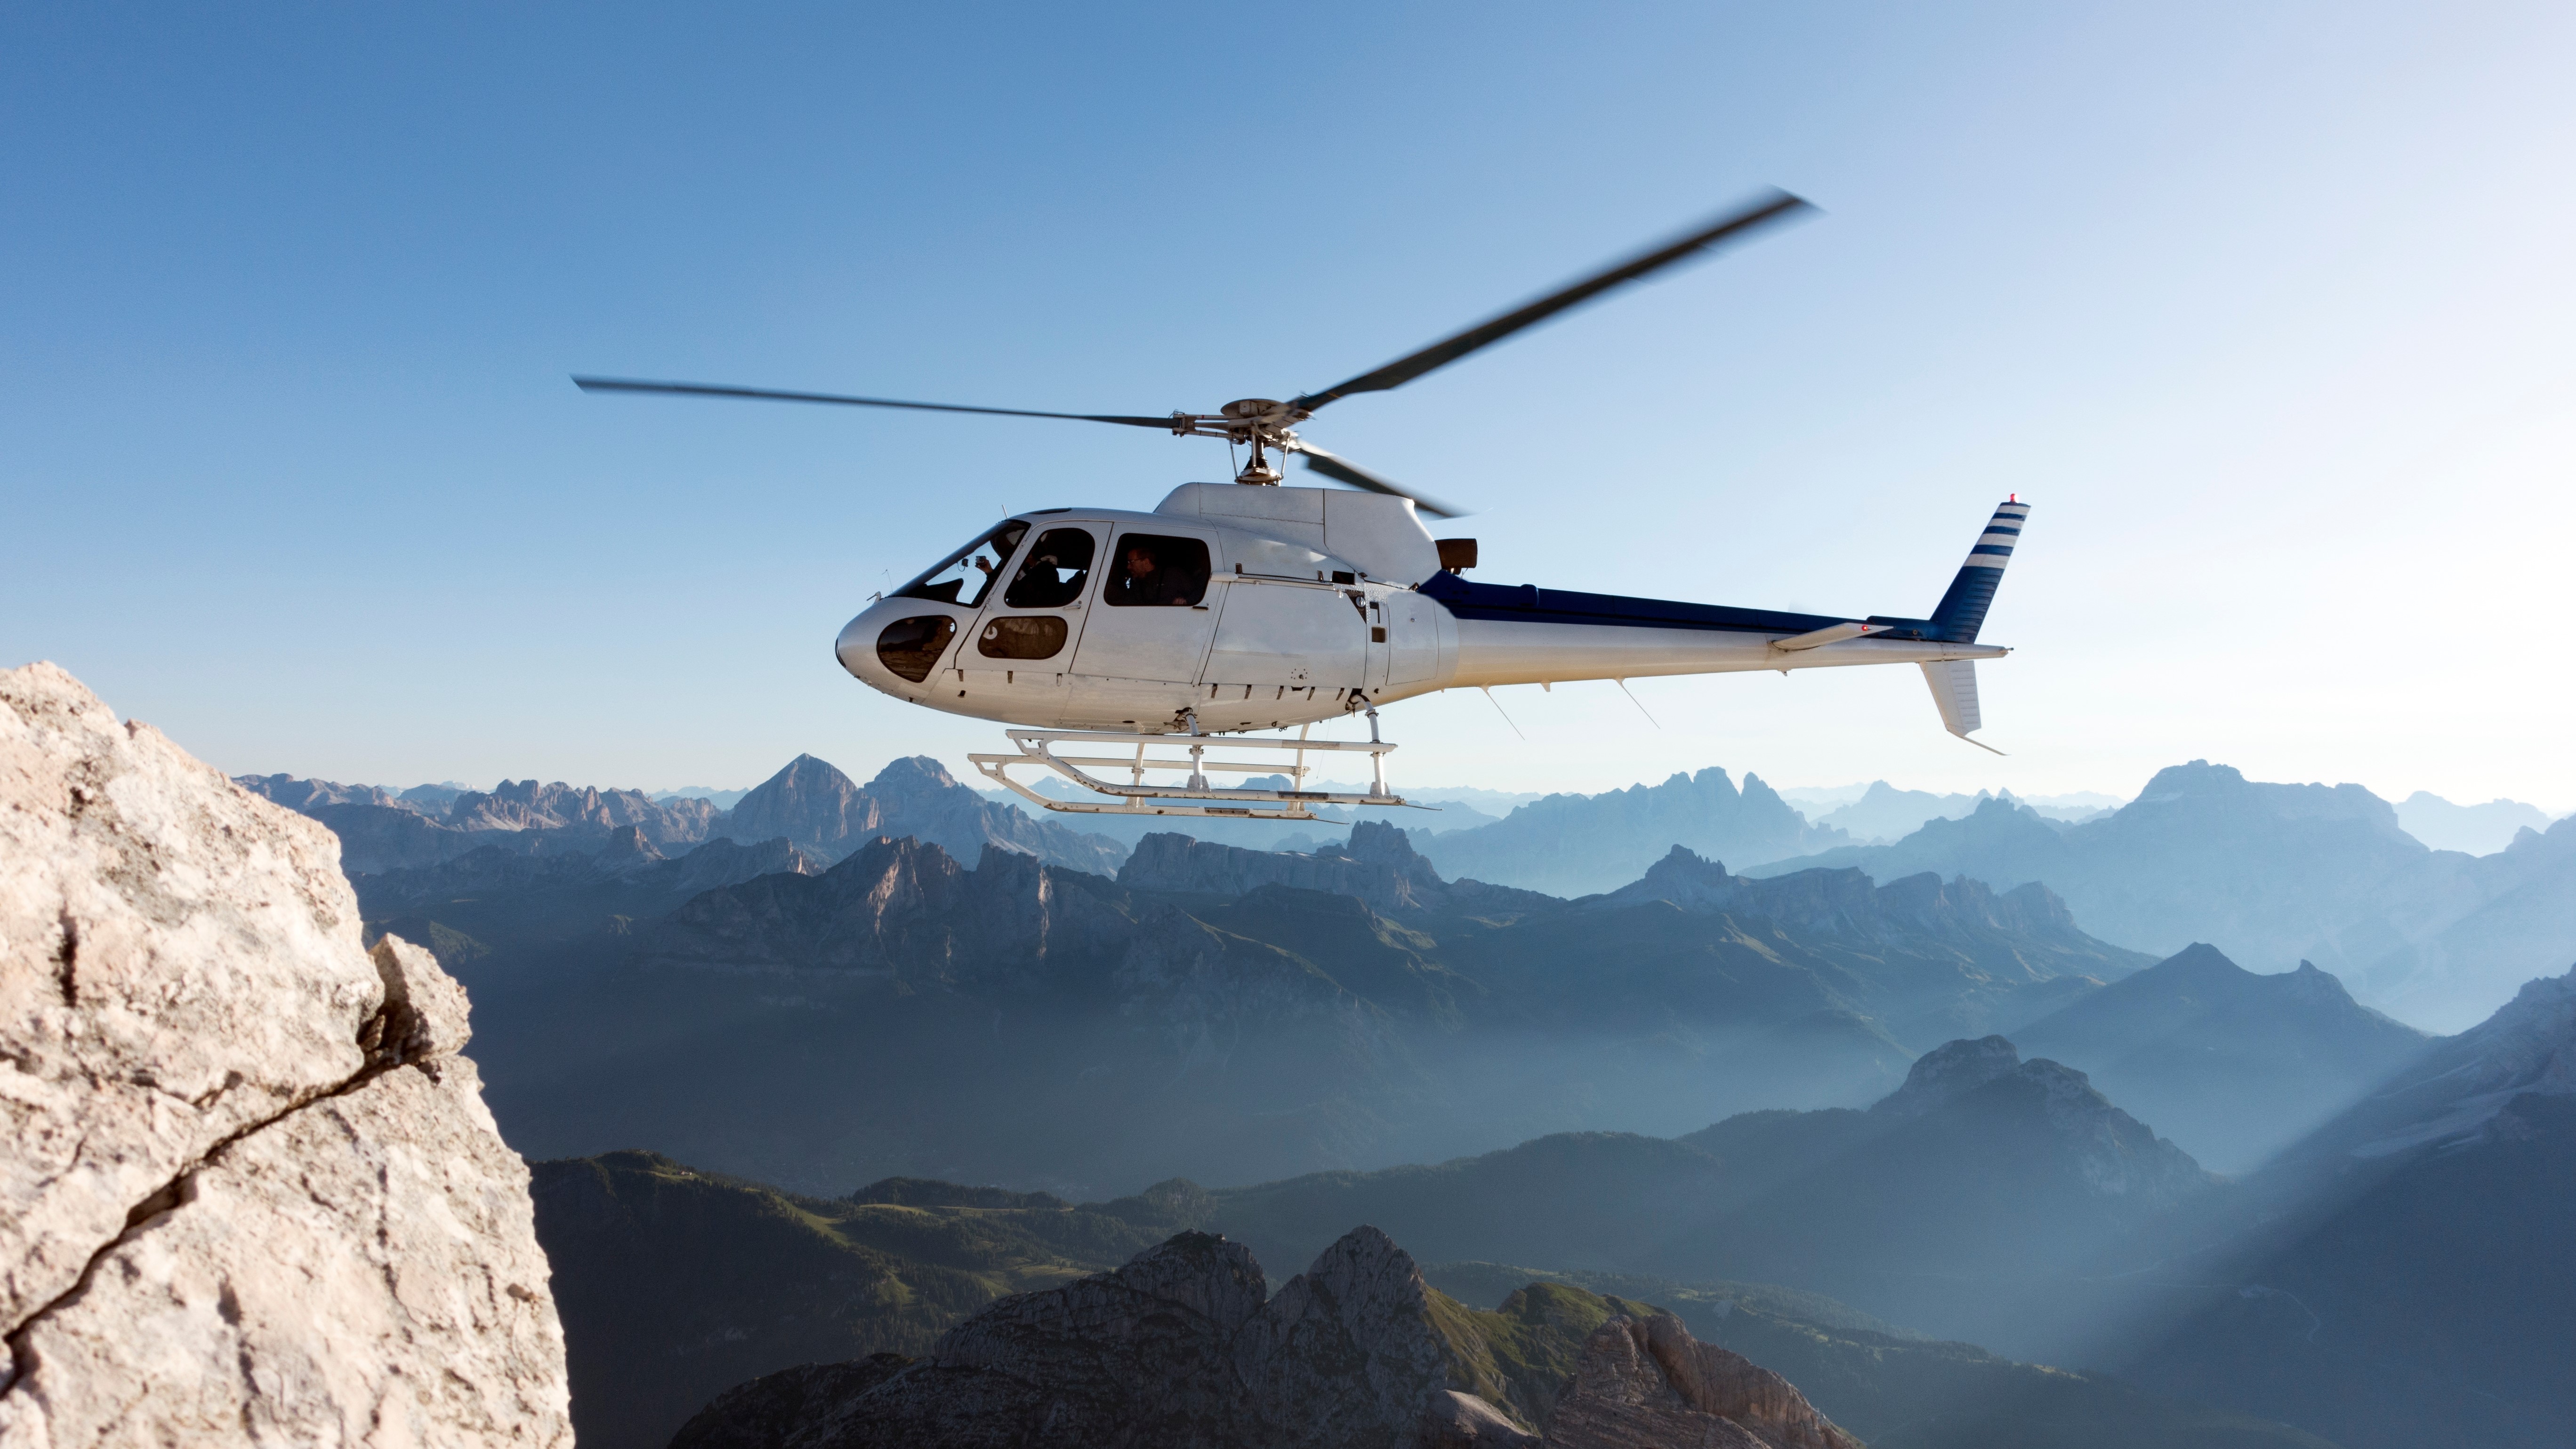 Clueless hikers require $10k helicopter rescue after hiking the Dolomites in sandals